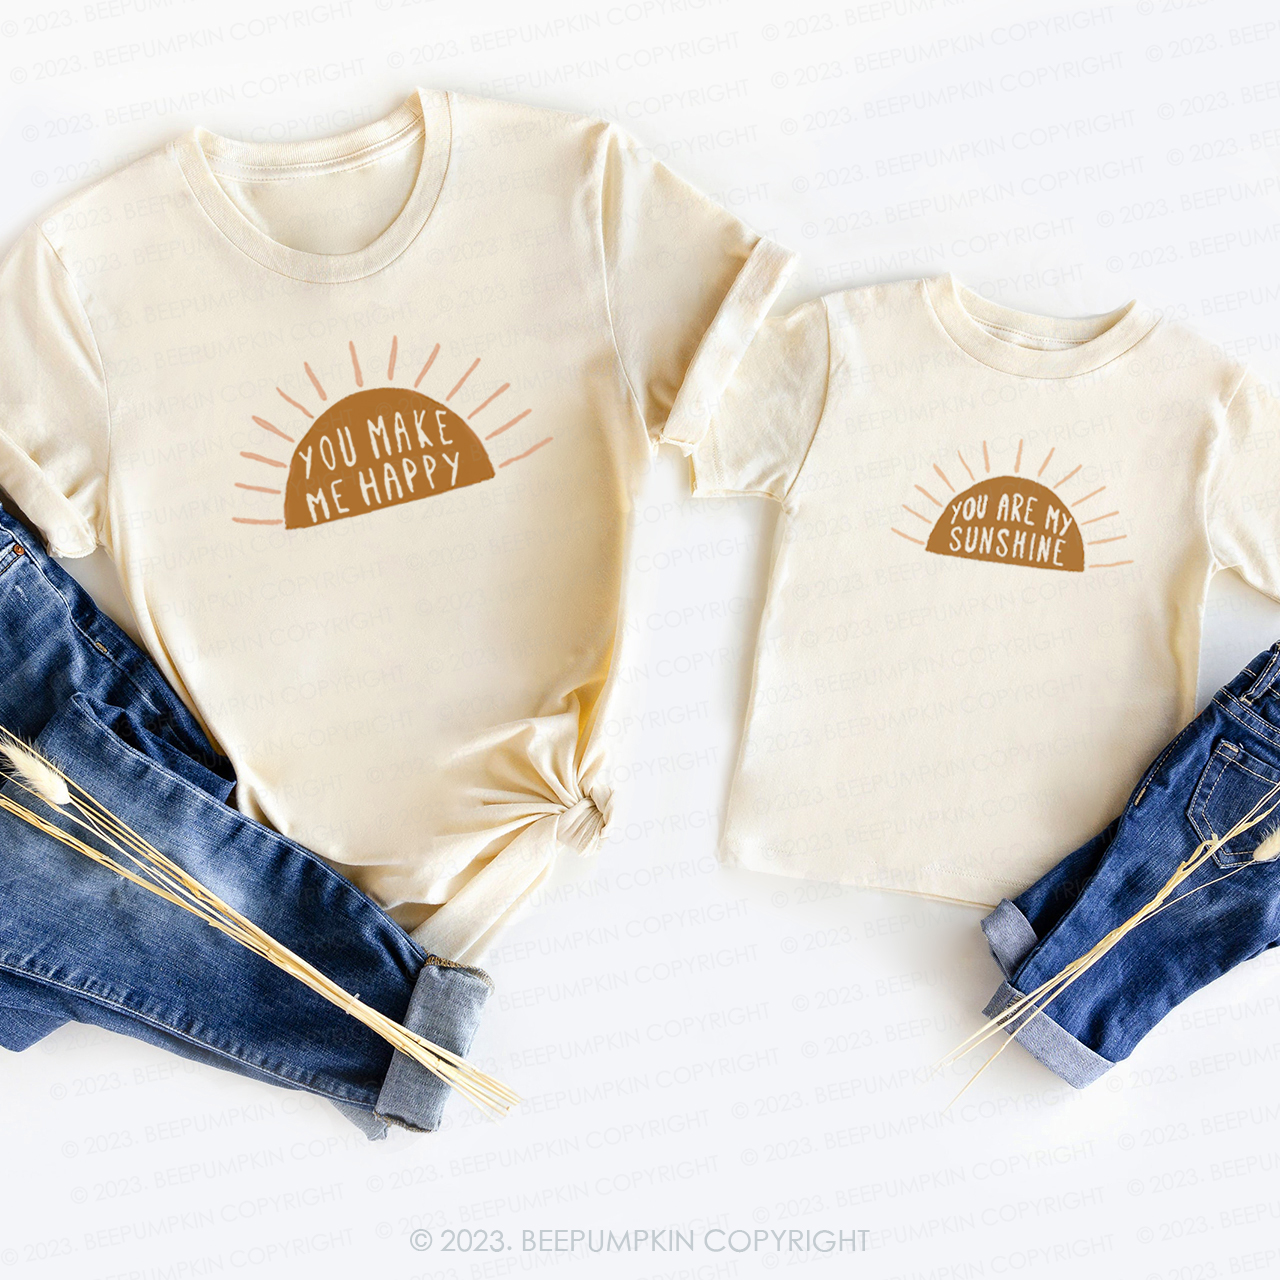 Dad and Baby Fishing Shirts  Dad to be shirts, Personalized clothes, Kids tee  shirts